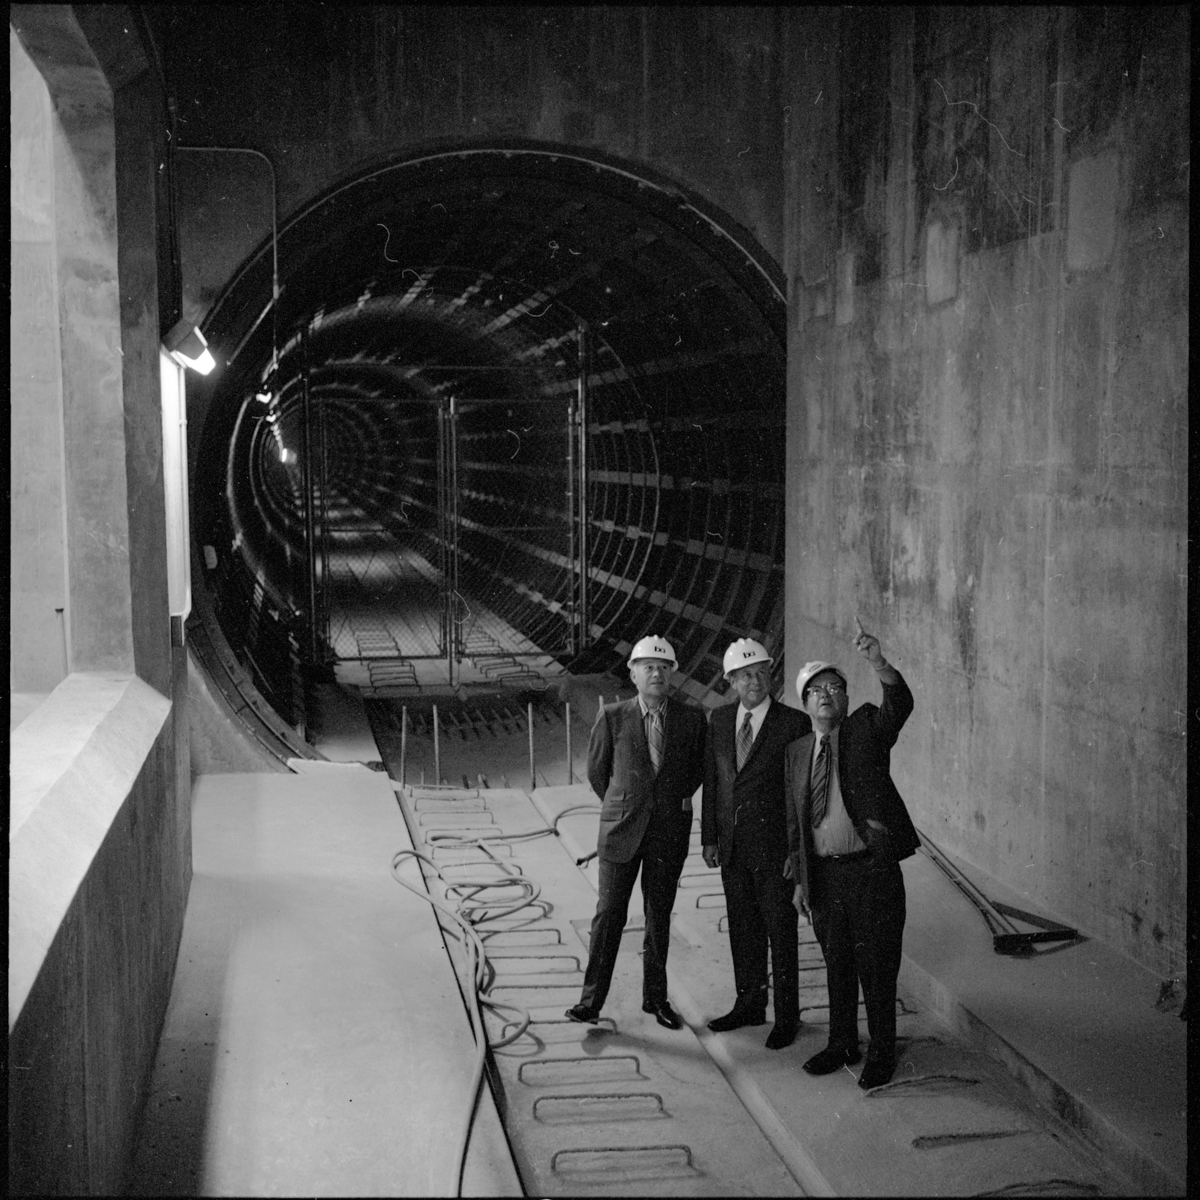 BART and Muni Officials Previewing Muni Metro Tunnel Construction at Montgomery Station | July 22, 1970 | M0896_2